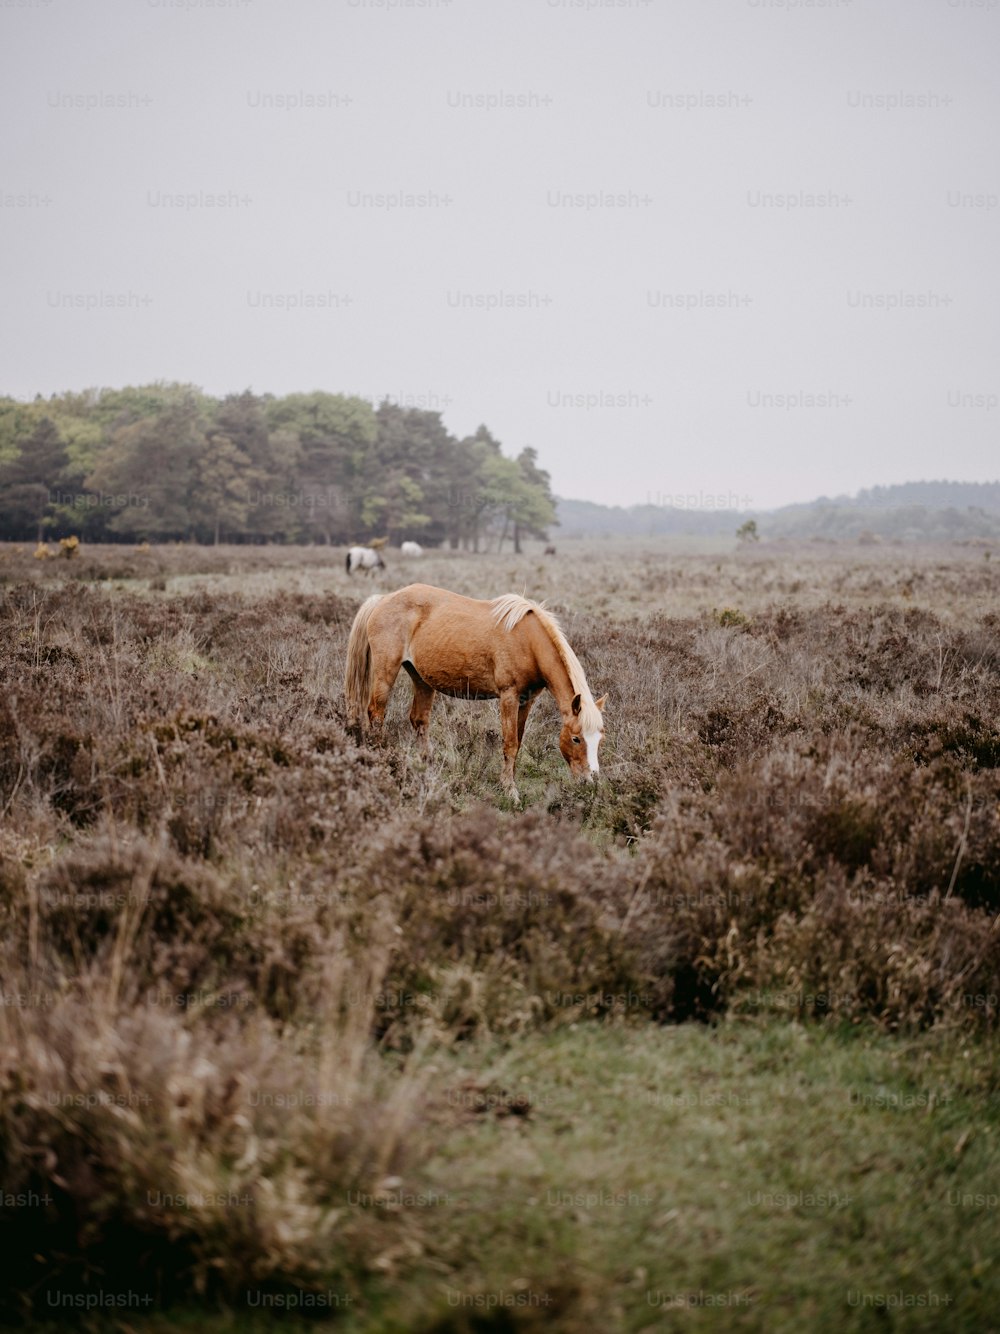 a brown horse grazing in a field with trees in the background